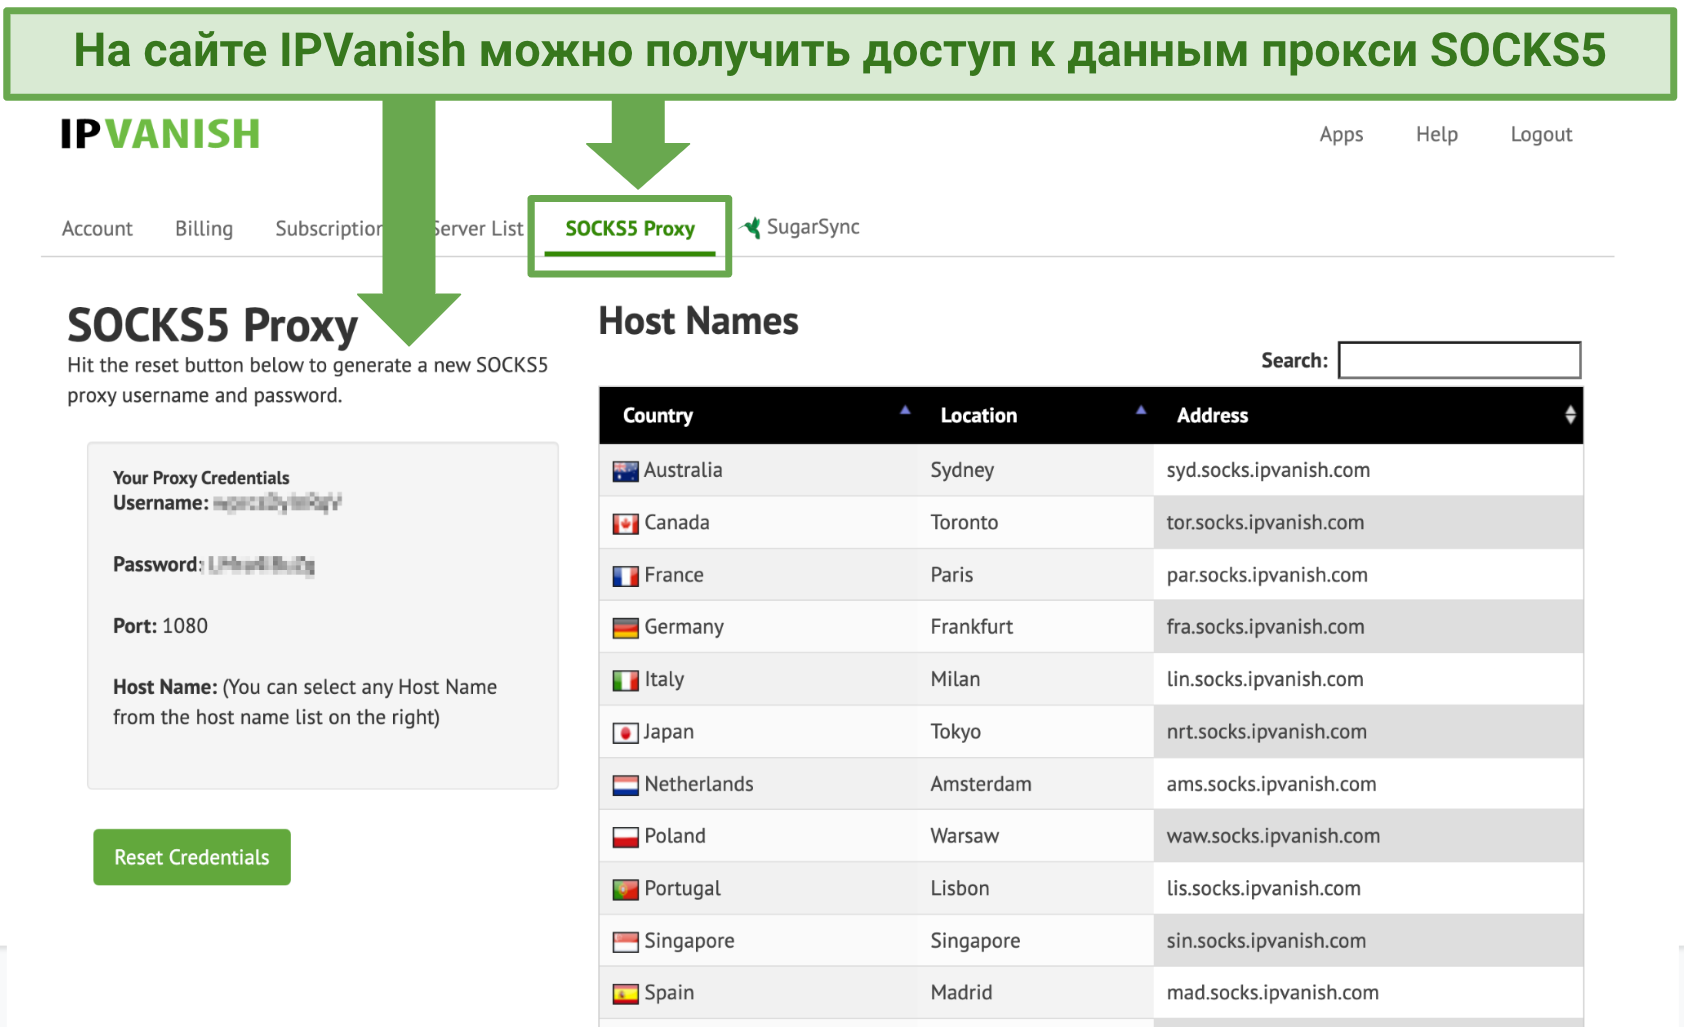 Screenshot showing how to navigate the IPVanish website to access your SOCKS5 proxy details